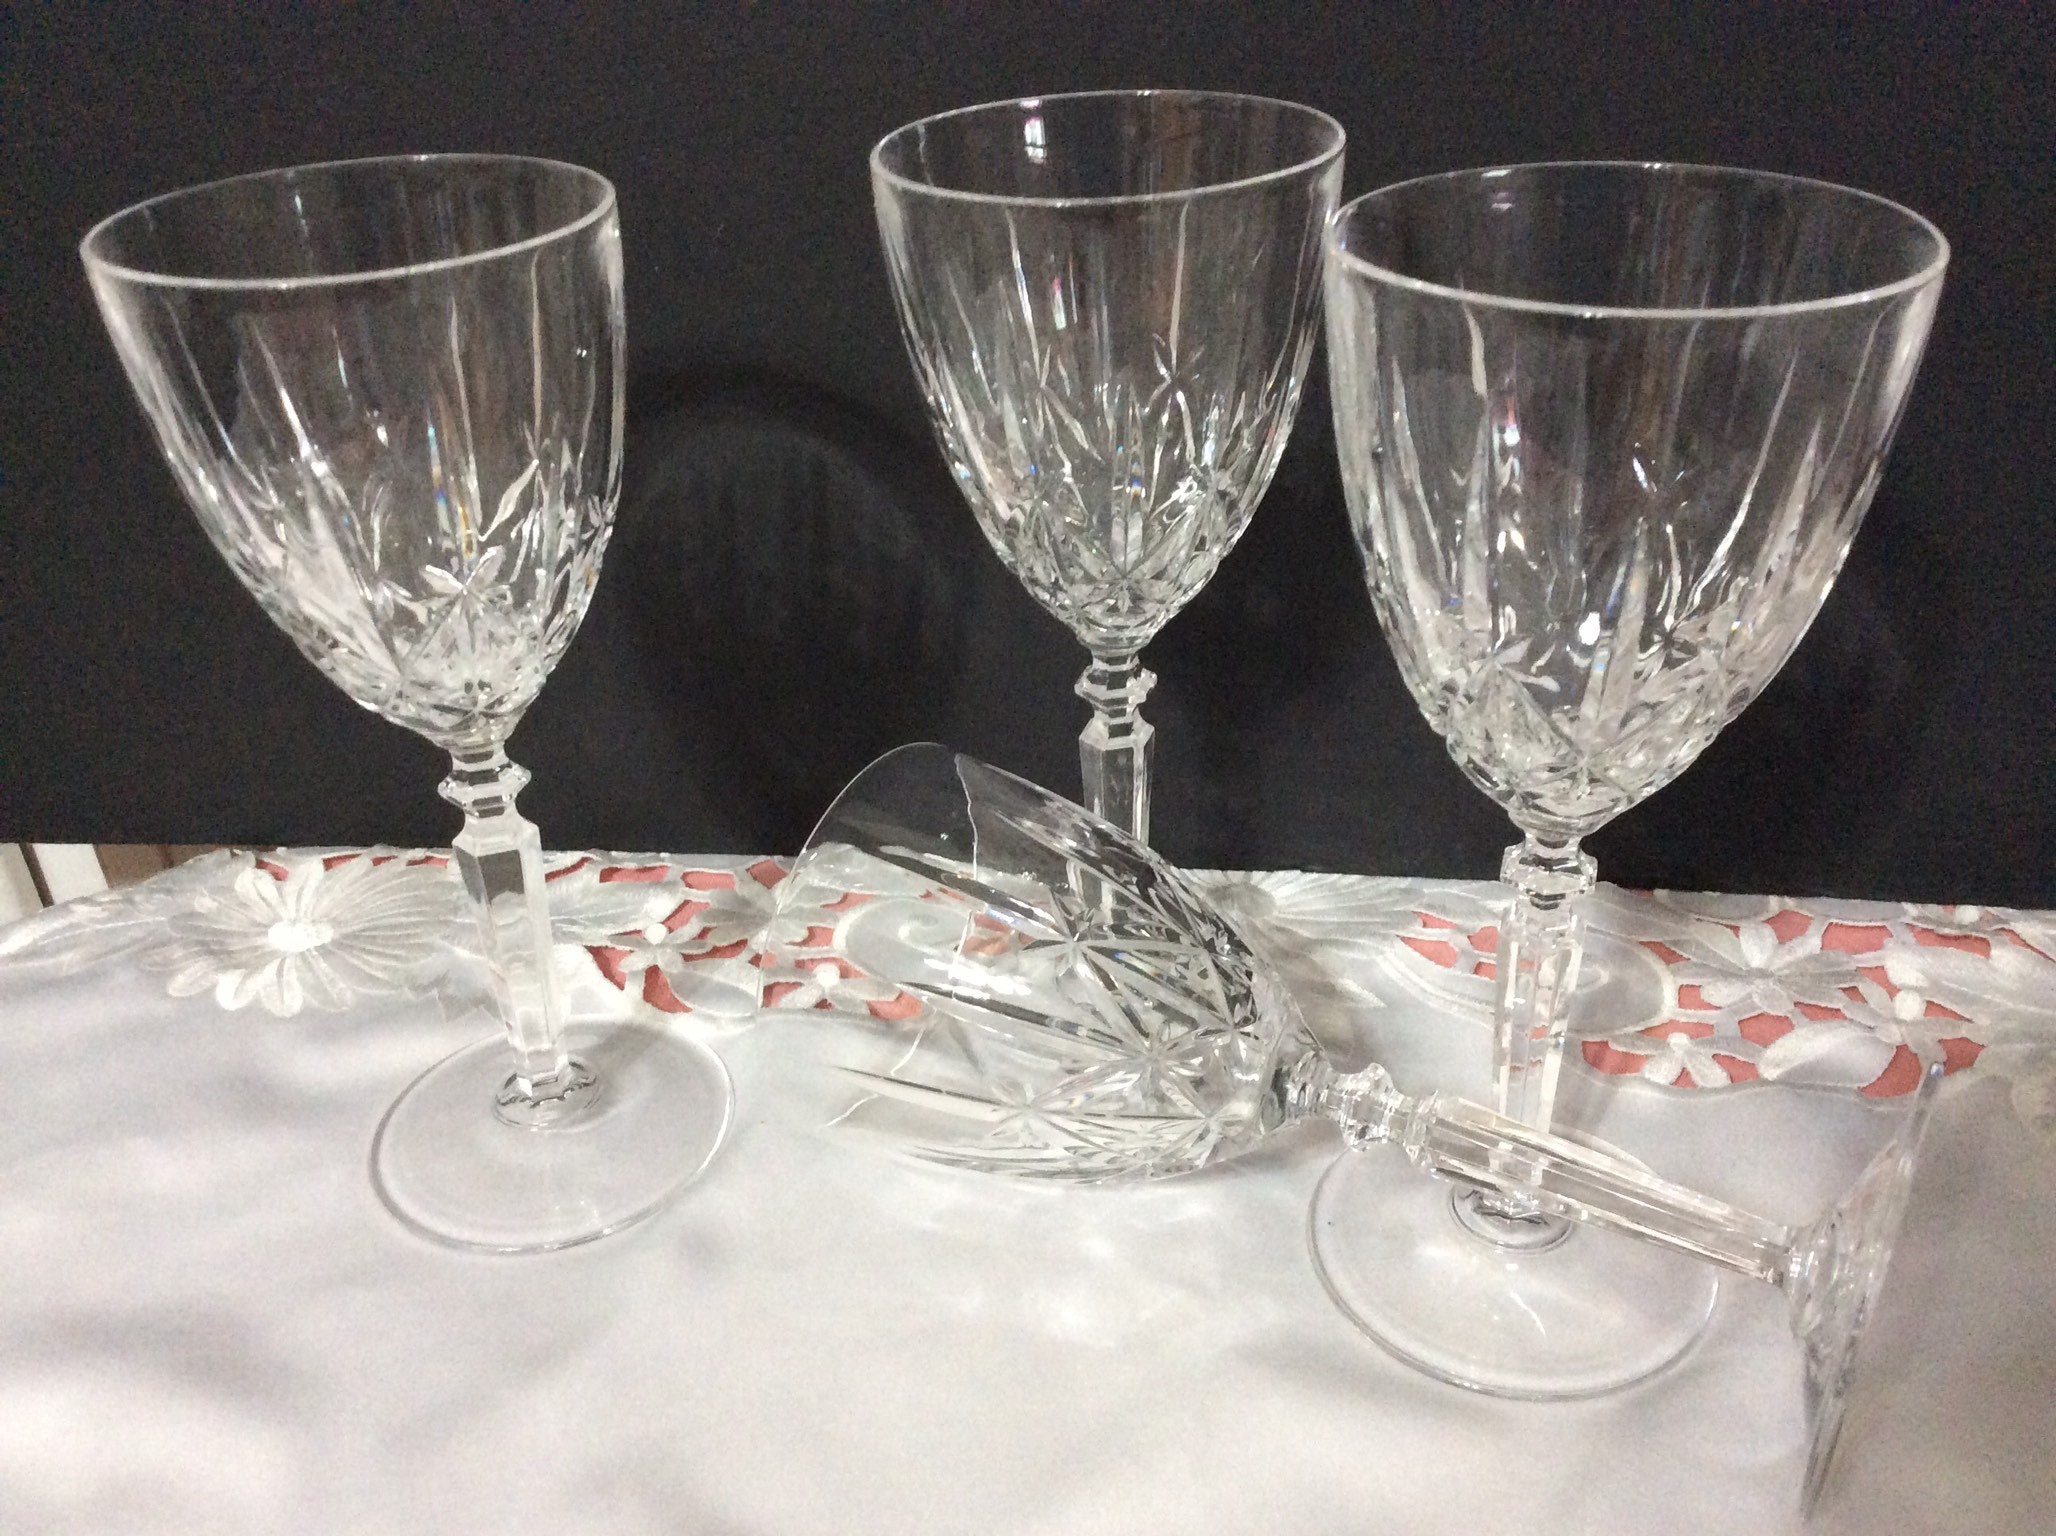 Luxury Crystal Glass Textured Wine Glasses Set m, 4ppch, 6pice